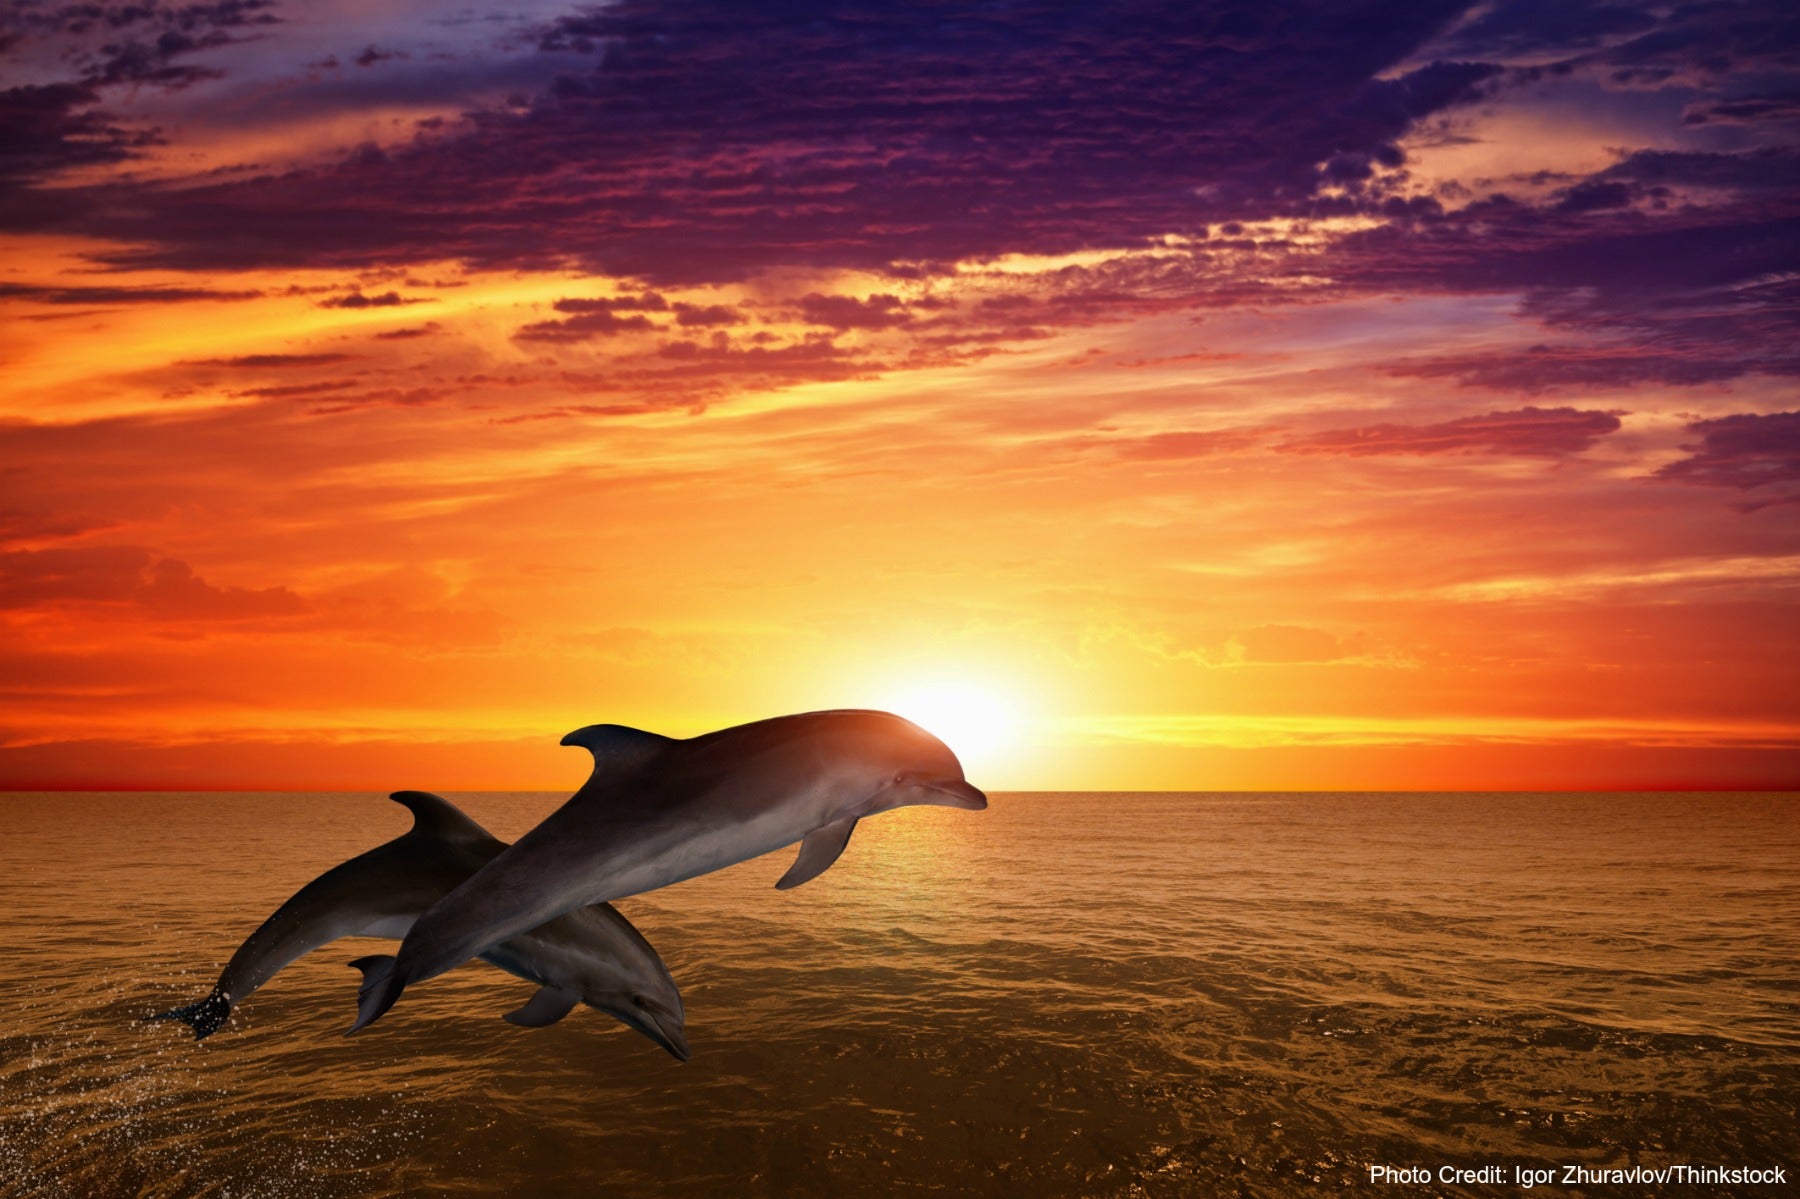 Dolphins in the sunset